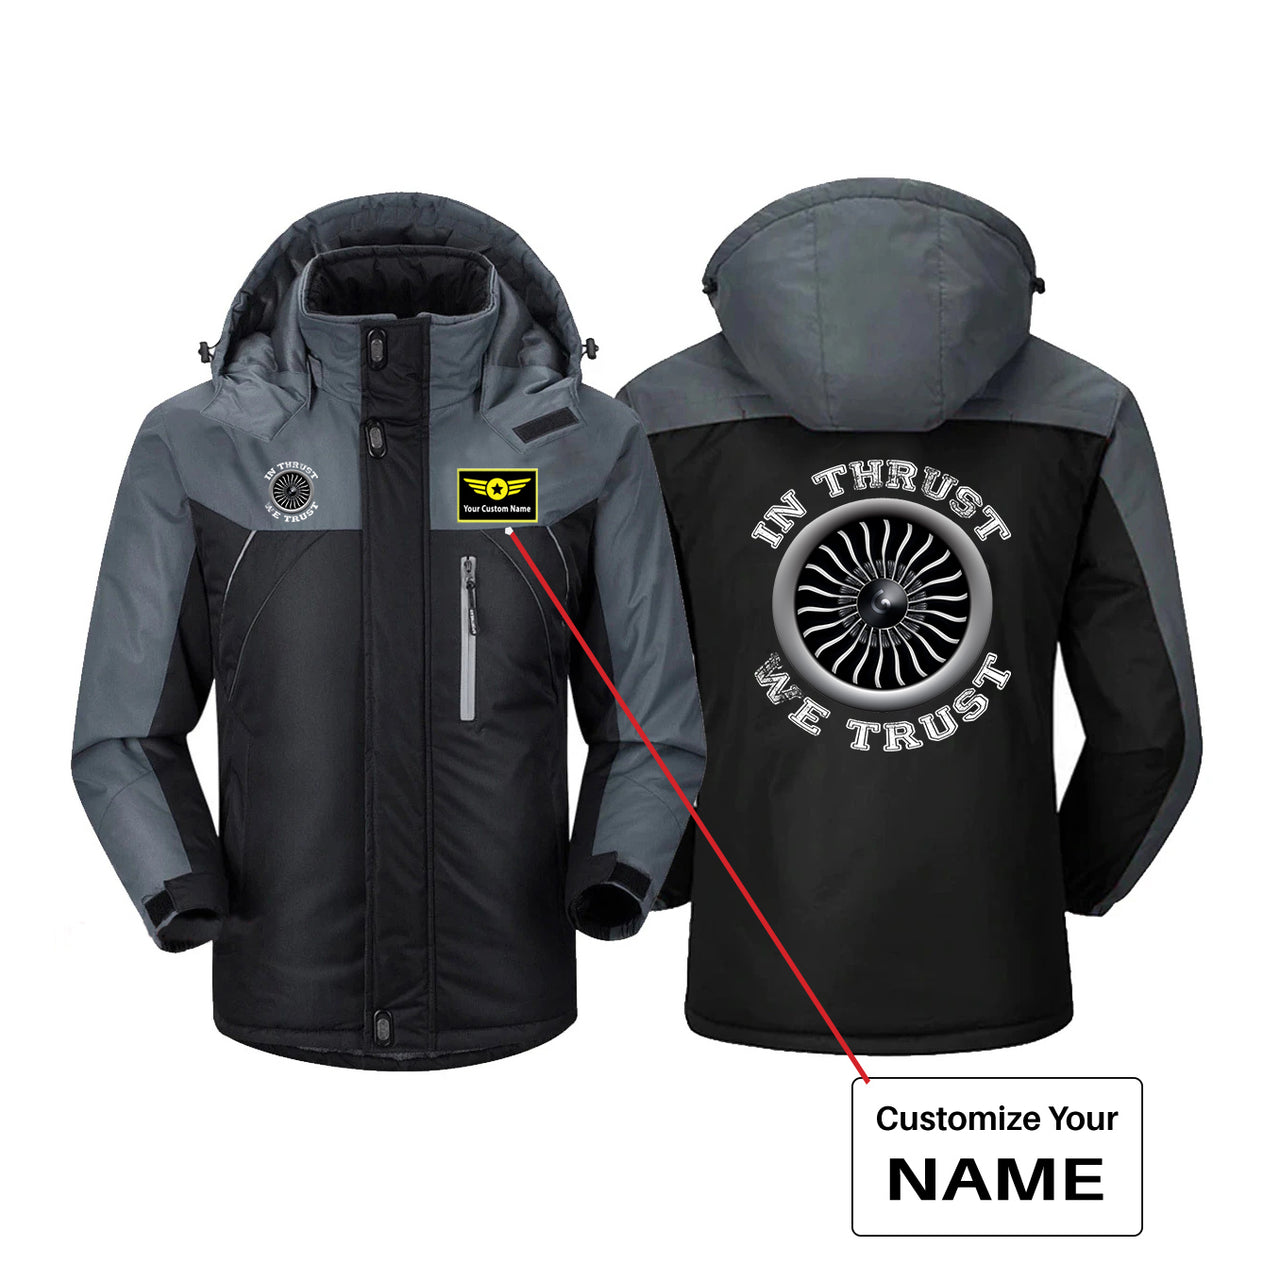 In Thrust We Trust (Vol 2) Designed Thick Winter Jackets